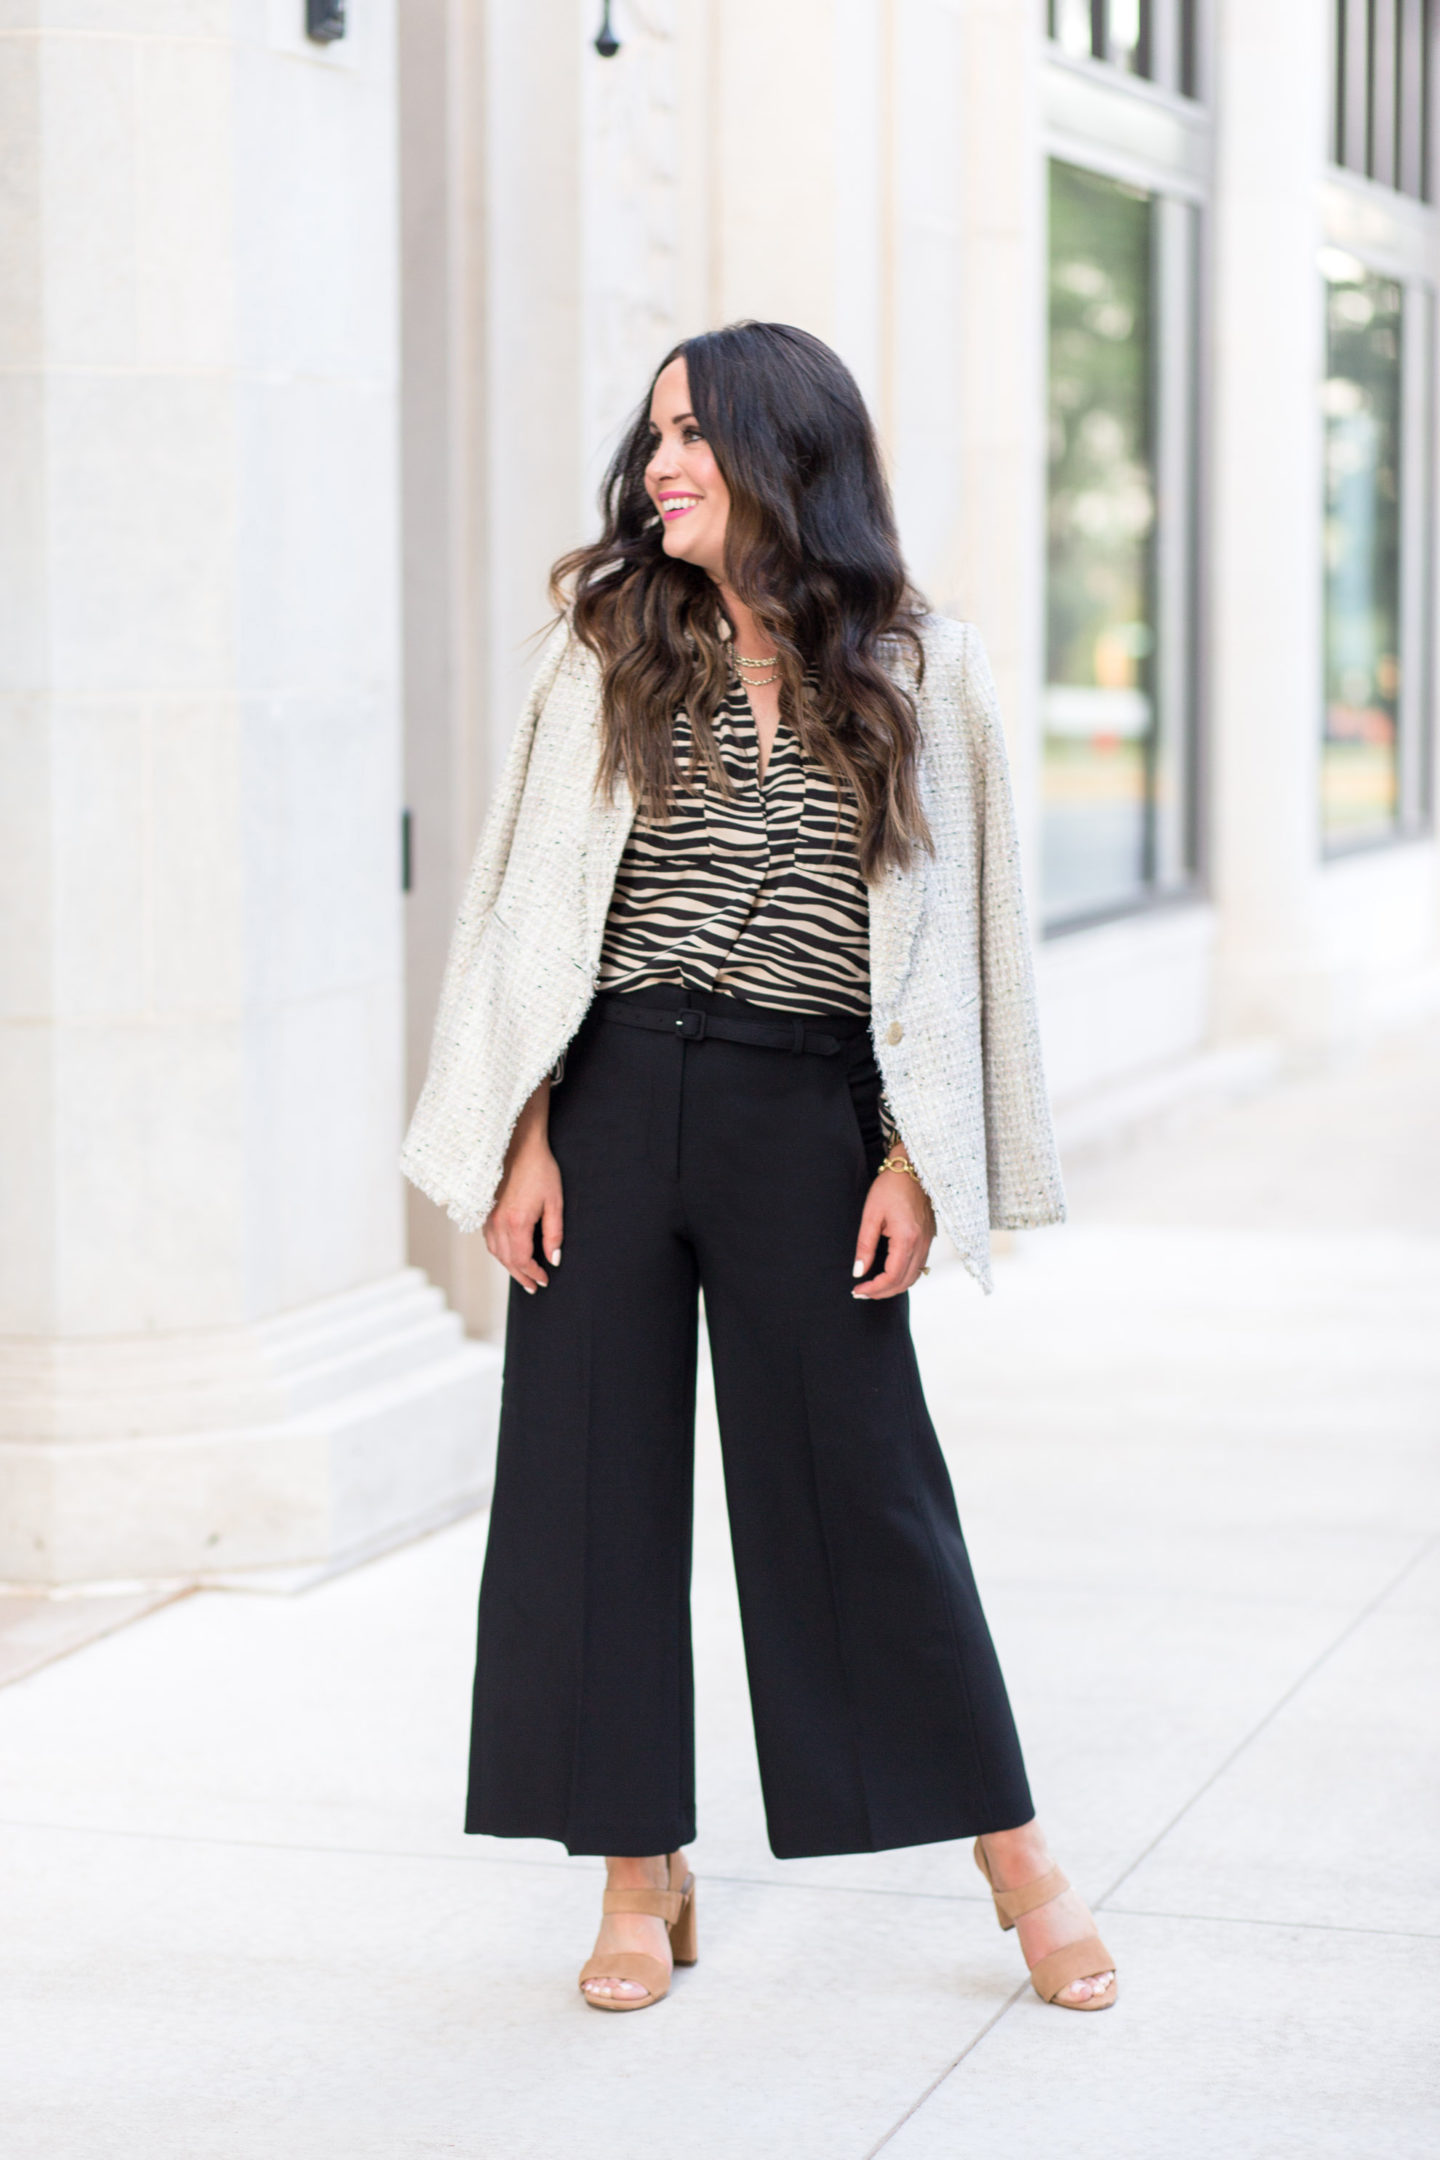 Zebra Print + Transitional Fall Styles You Will Love - The Double Take ...